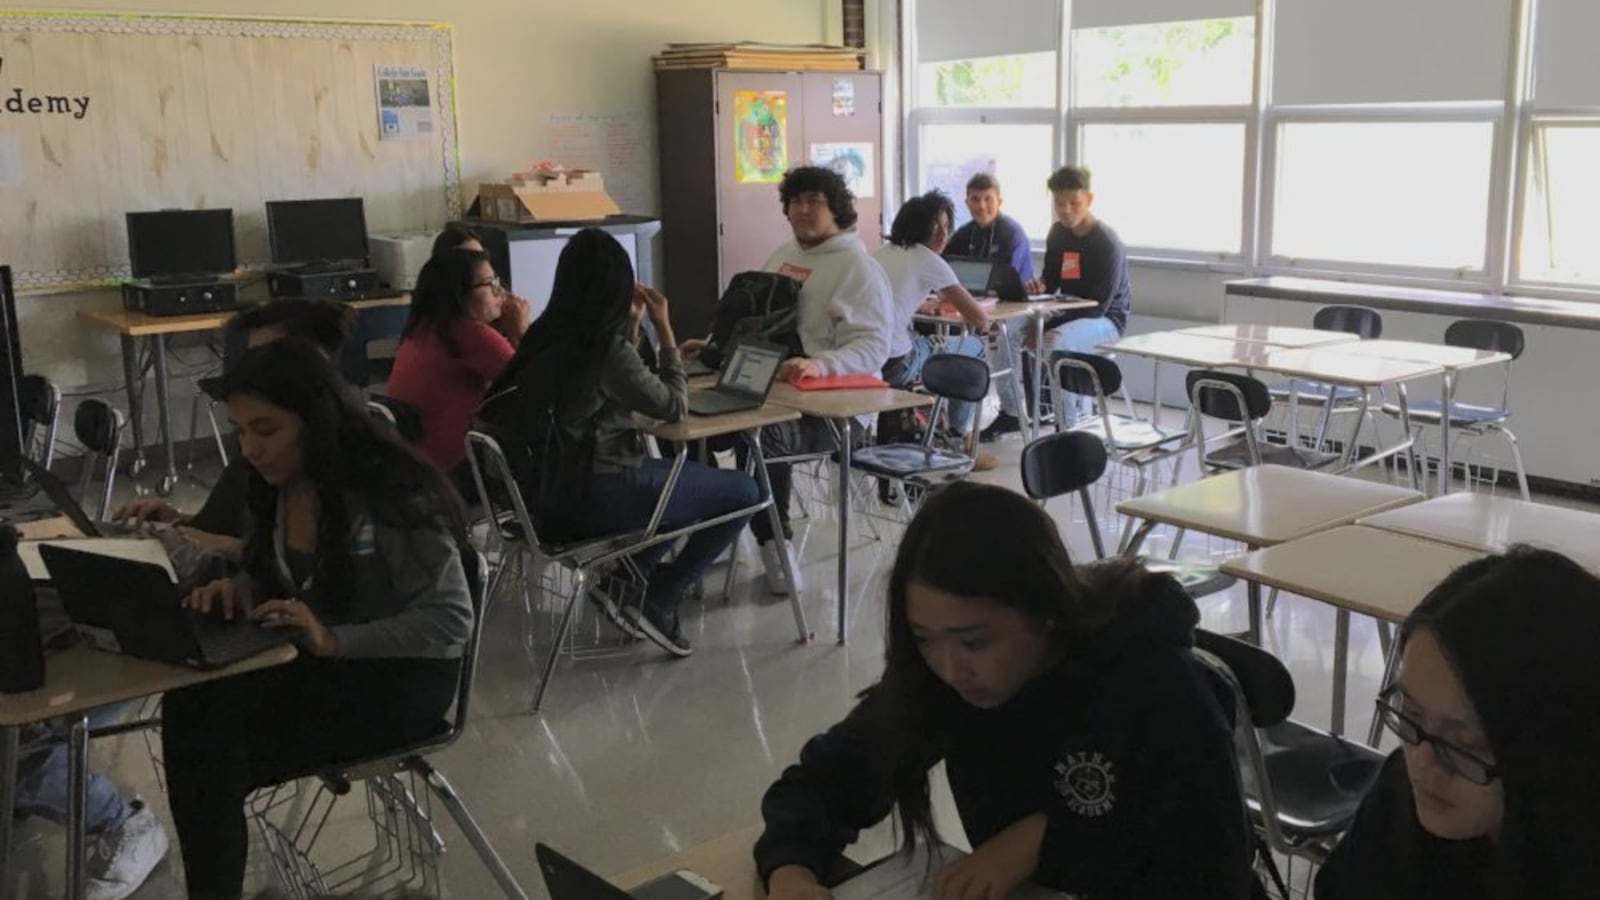 Students in a pre-law class at Chicago's Mather High fill out college applications on Sept. 19, 2018. The class is one of the school's career technical education offerings that it hopes will attract more students to enroll in the school.